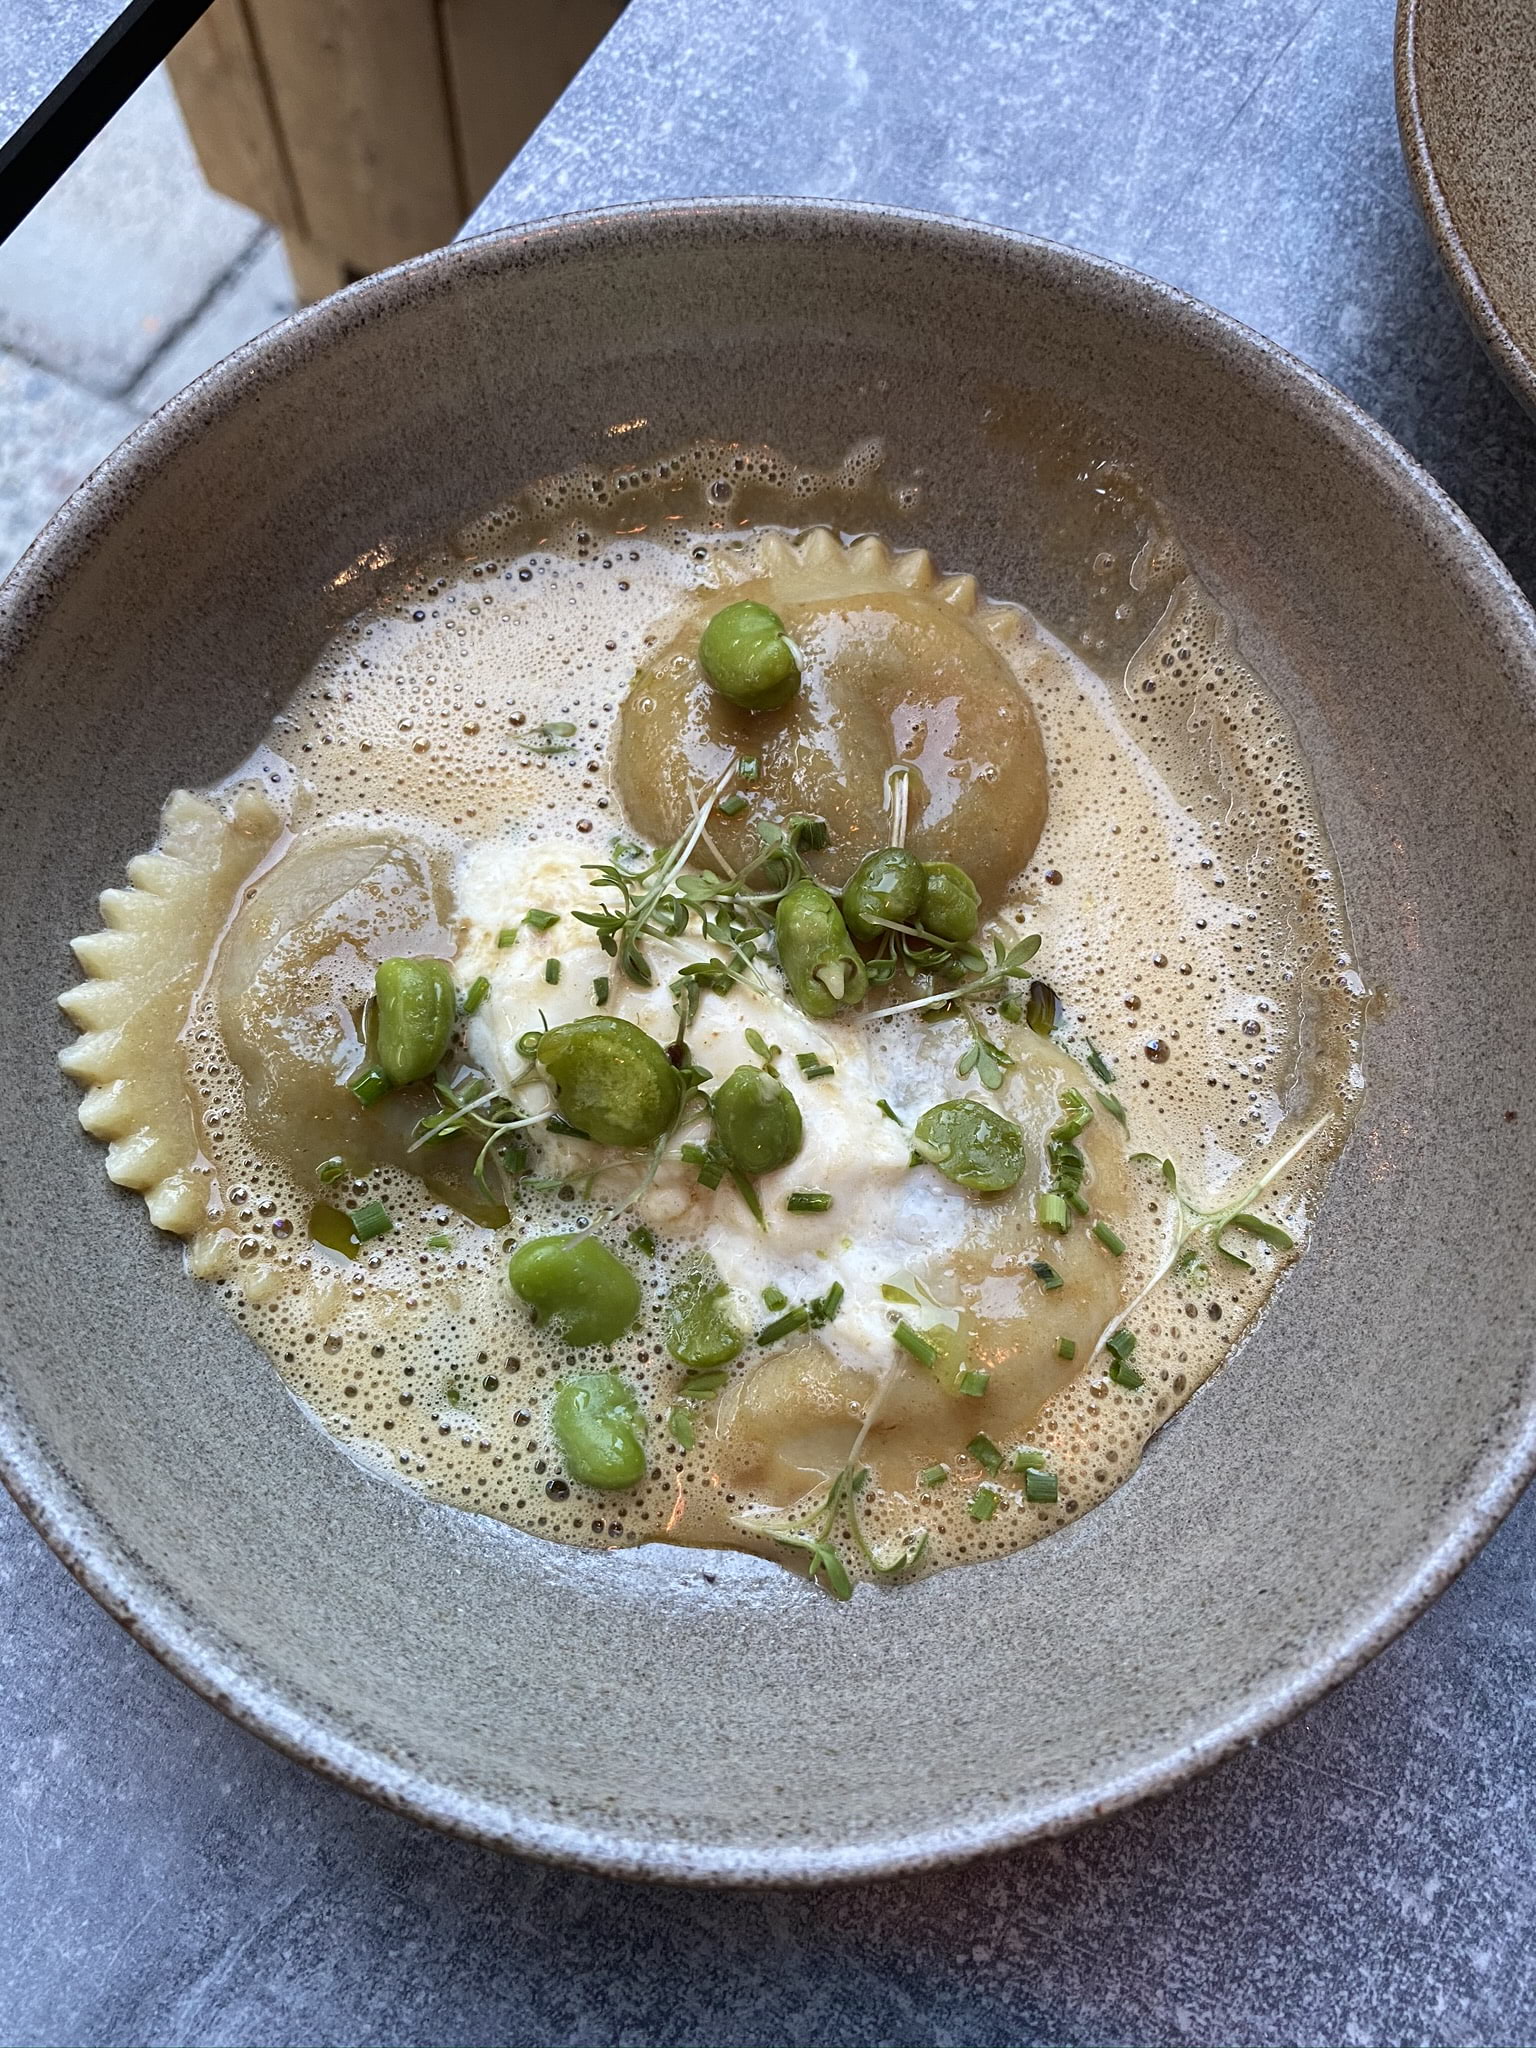 Ravioli – Photo from DoMa by Erica E. (01/09/2020)